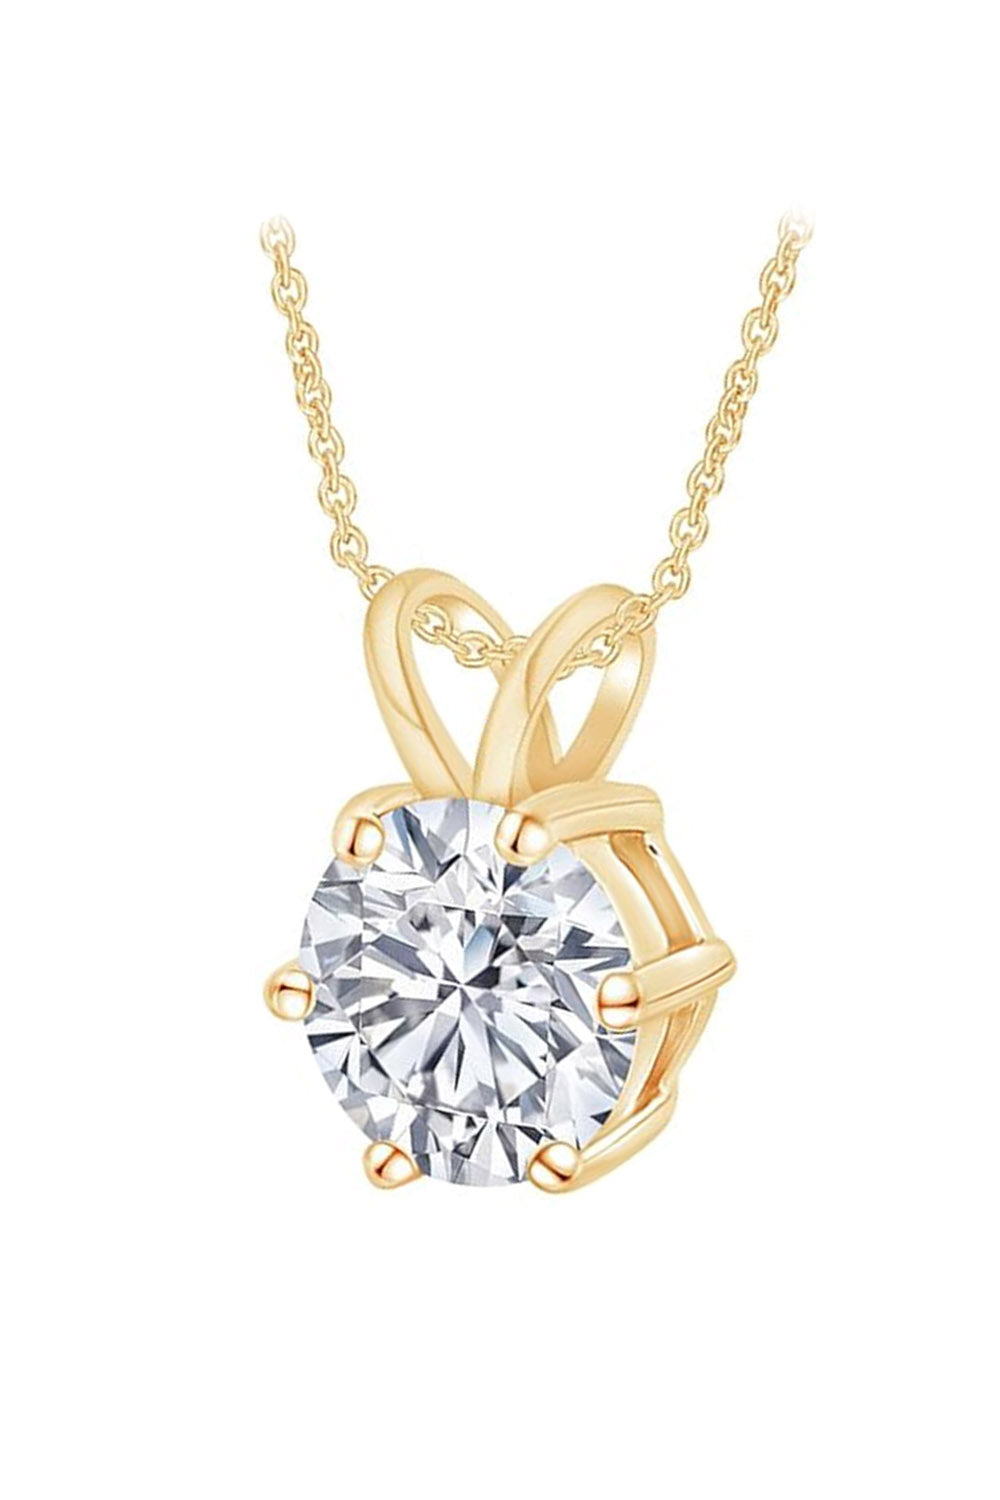 Yellow Gold Color 6 Prong Solitaire Pendant Necklace